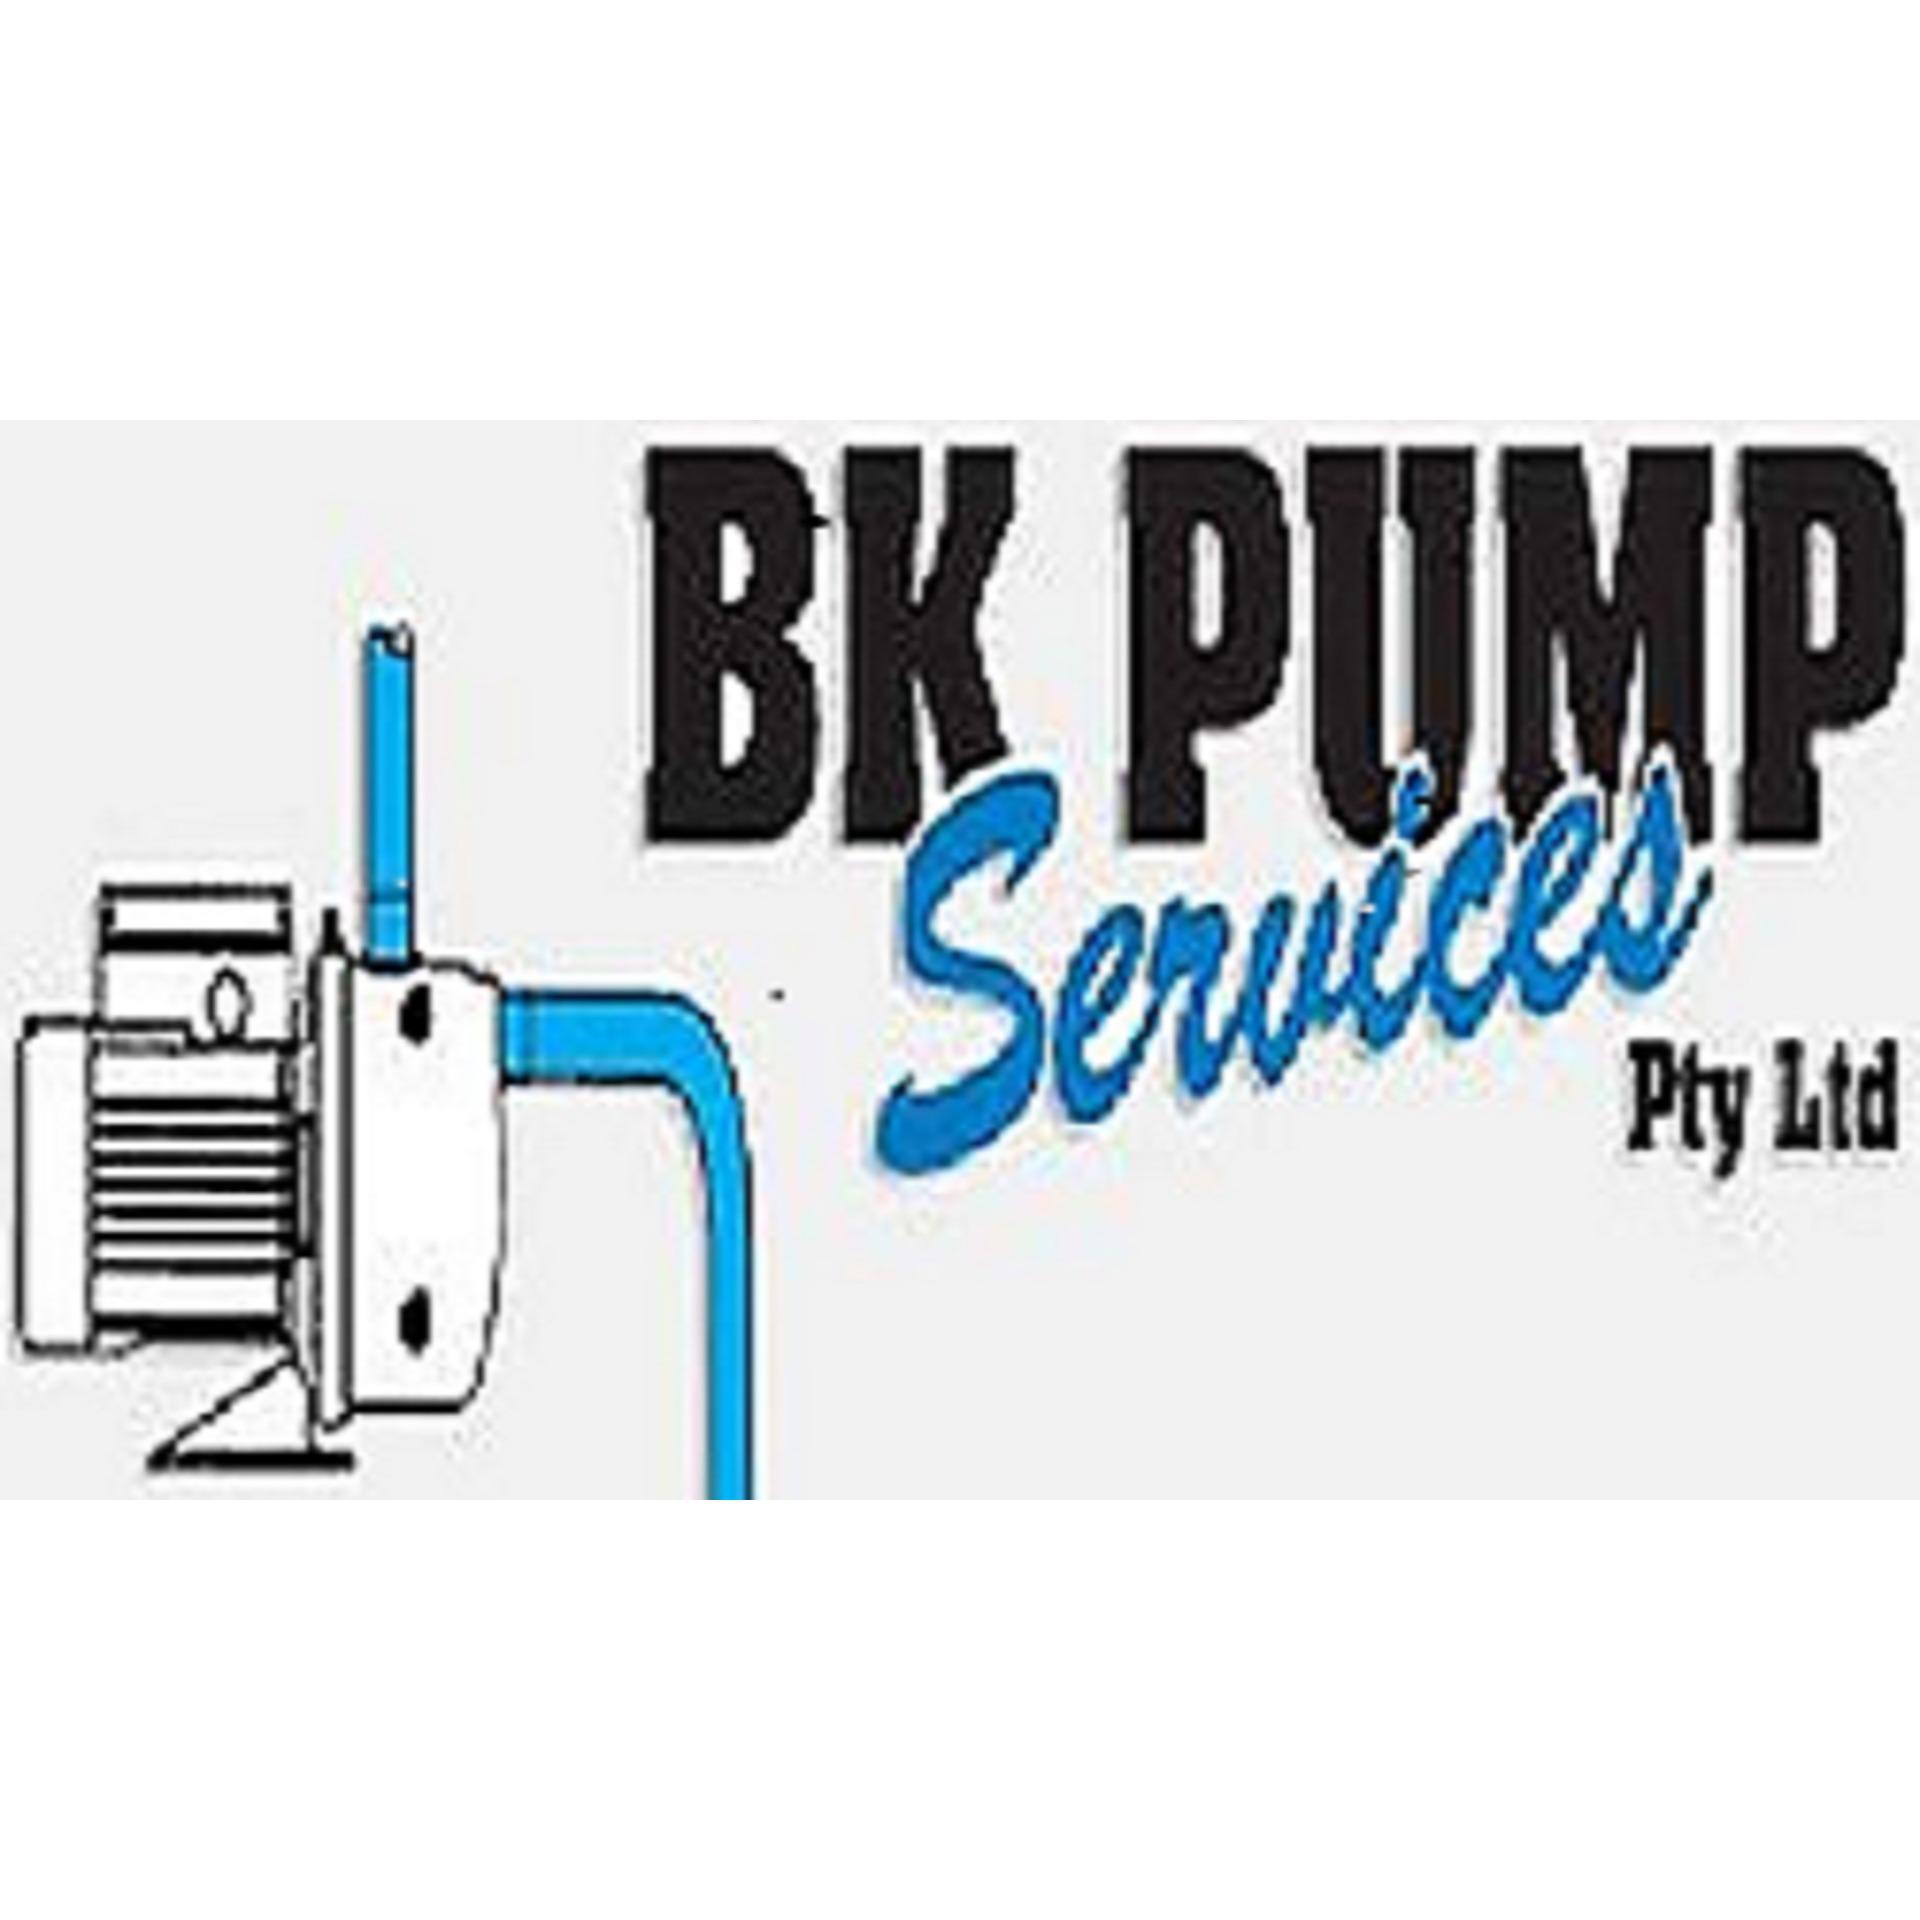 BK Pump Services offers Domestic and Commercial servicing and repairs on water and sewerage pumps. W BK Pump Services Pty Ltd Varsity Lakes (07) 5568 0507